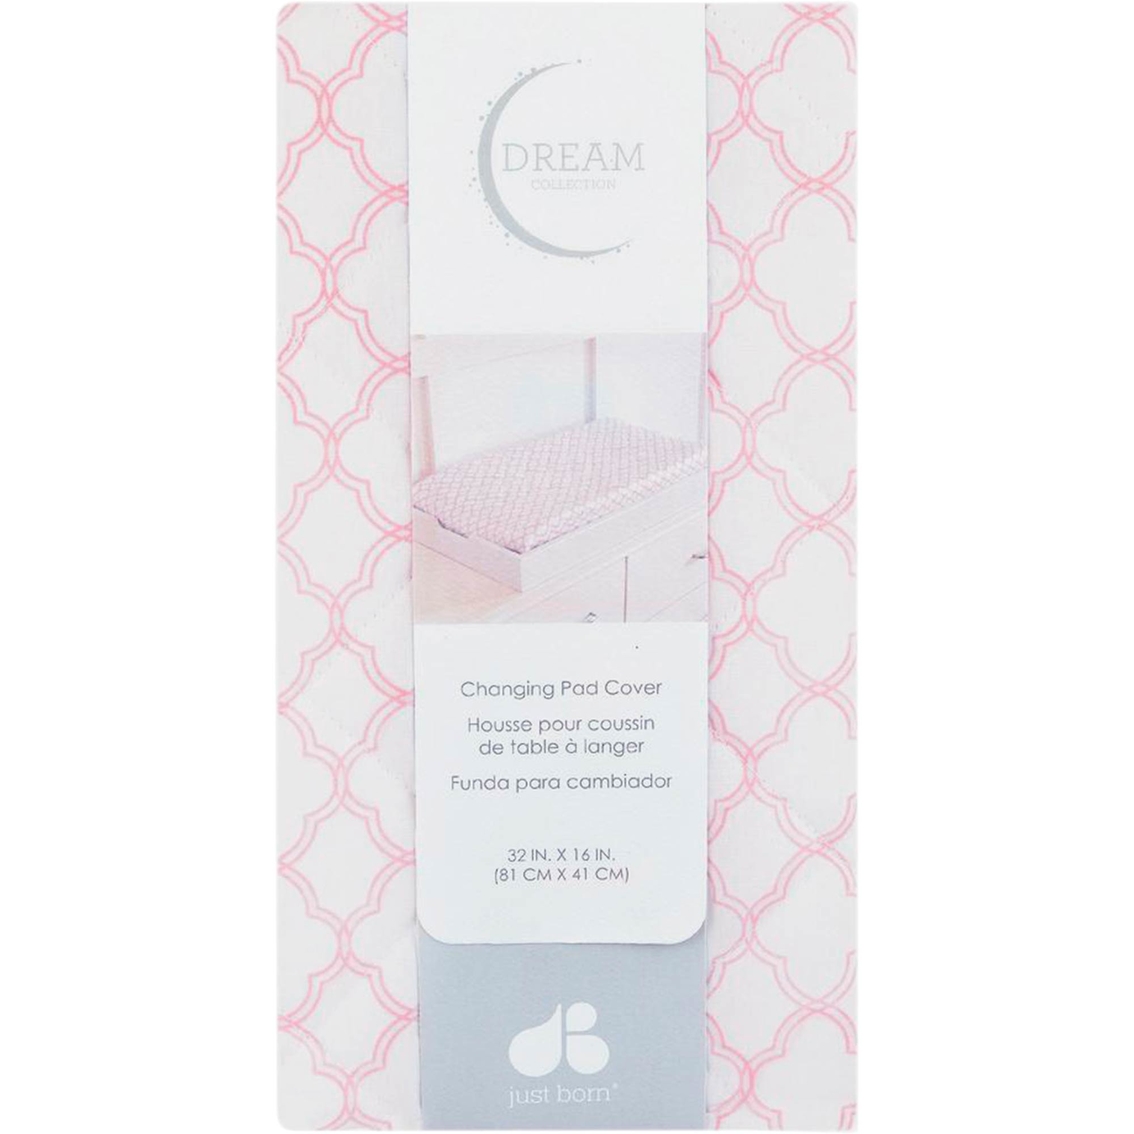 Gerber Infant Dream Crib Bedding Collection Changing Pad Cover - Image 2 of 2